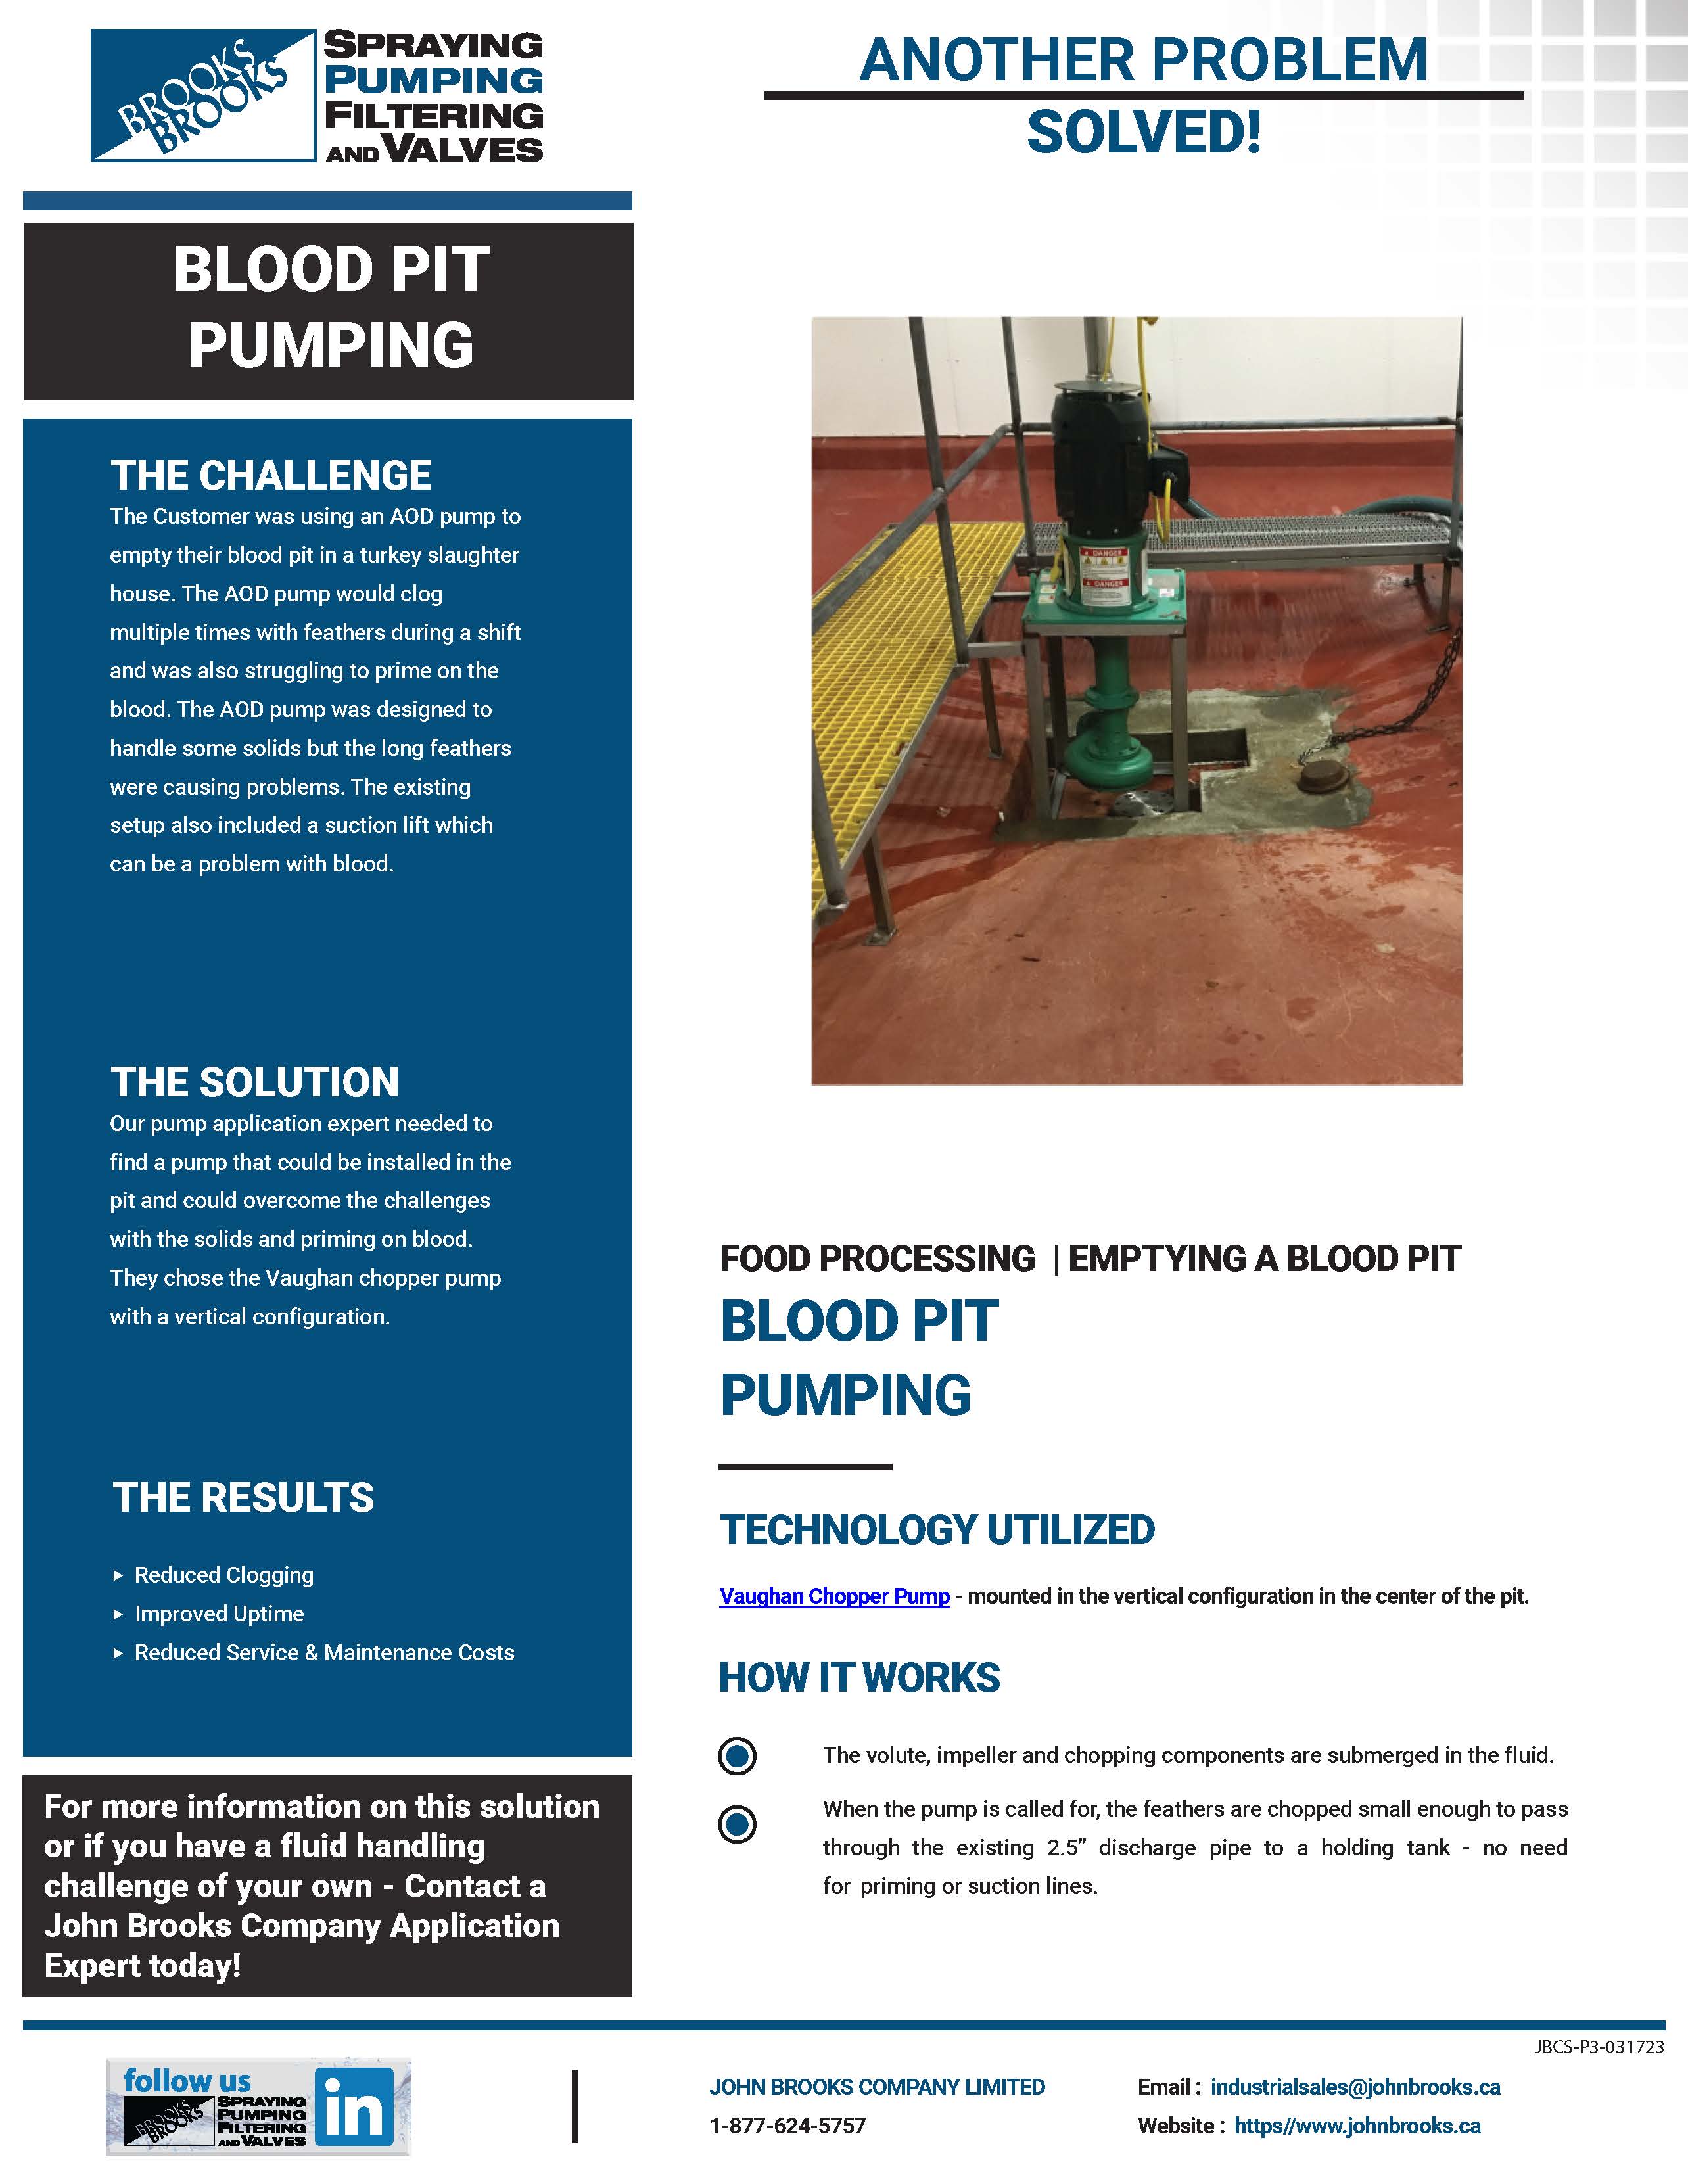 Vaughan Chopper Pump Reduces Clogging in Blood Pit Pumping in Slaughterhouse